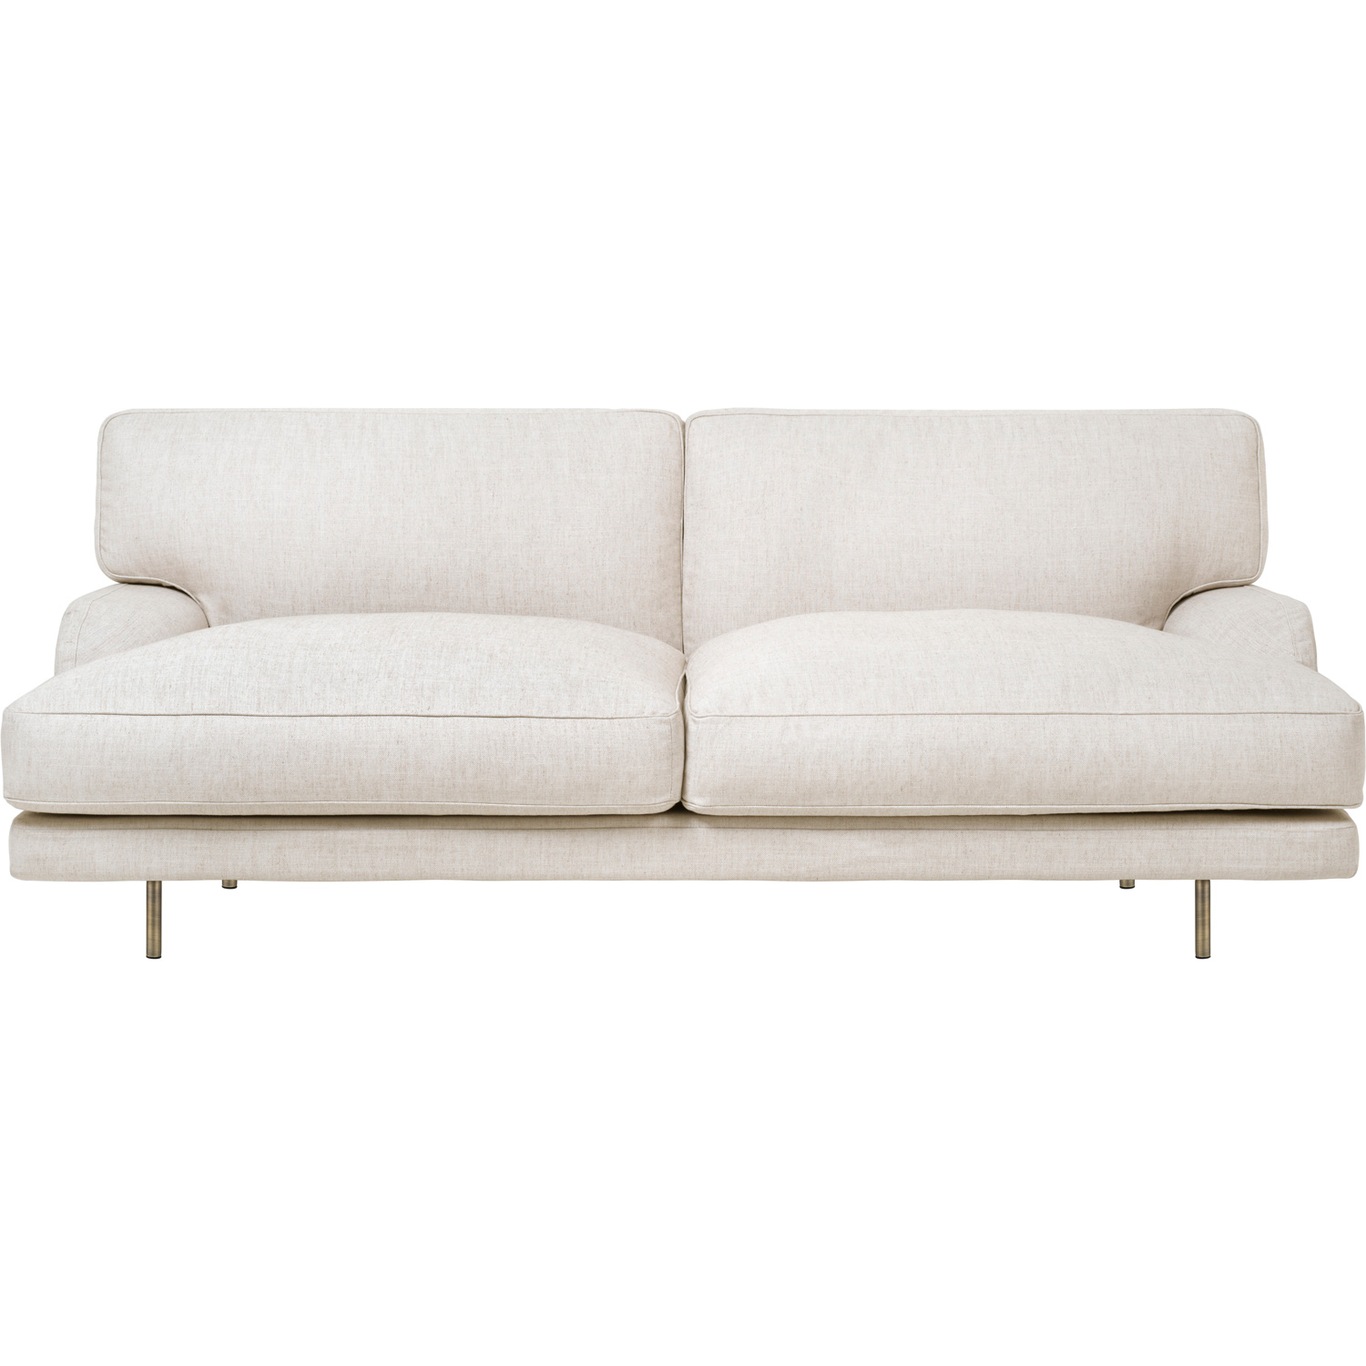 Flaneur Sofa FC 2-seters, Ben Messing / Hot Madison 419 Off White